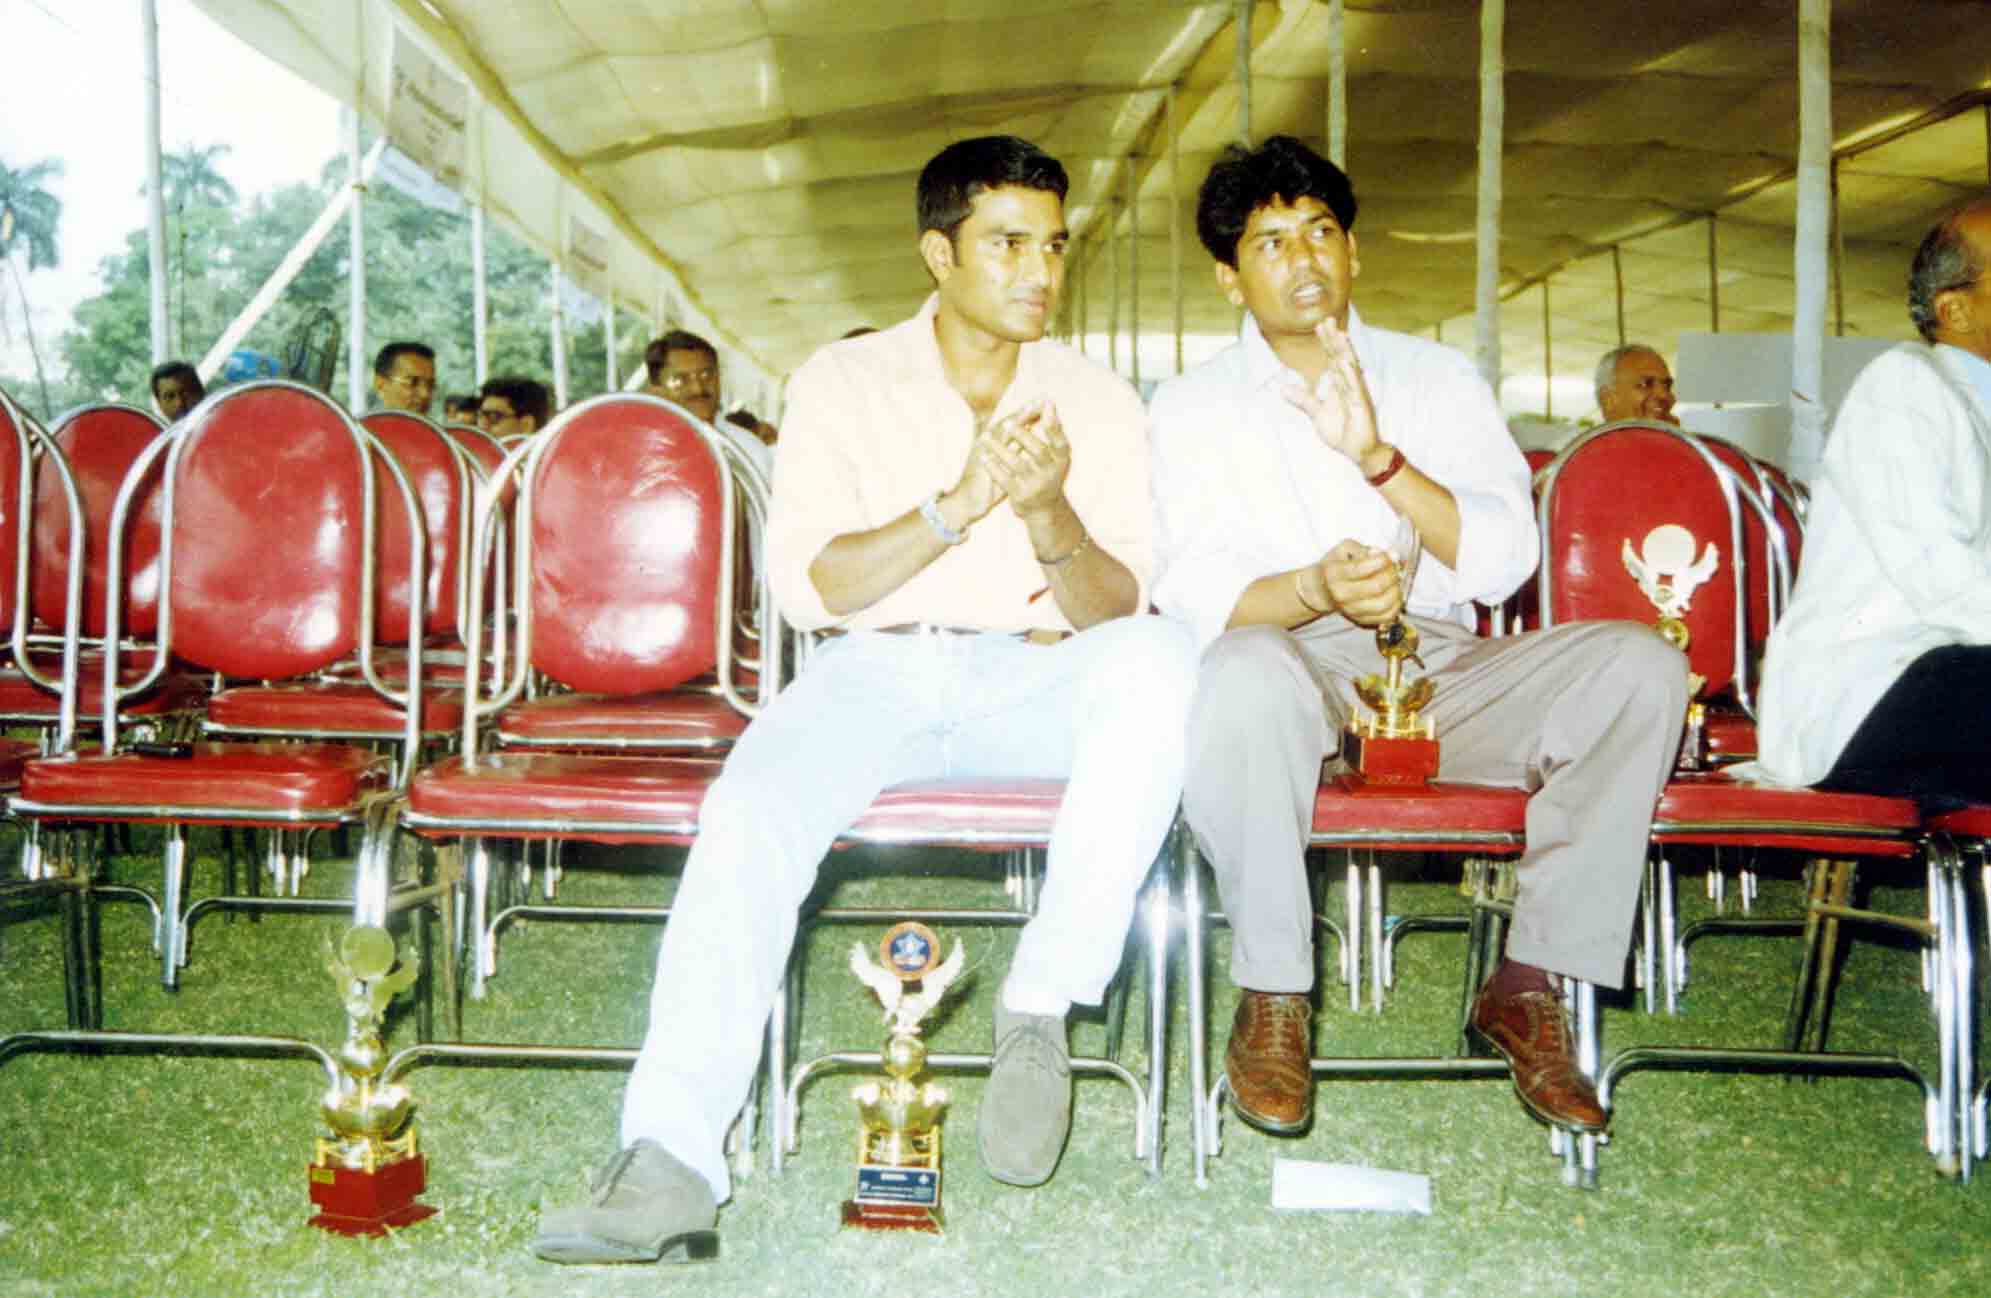 He released his autobiography in 2018 named 'Imperfect', which shed light on his life and gave reasons why his cricketing career was short-lived playing only 111 matches in Indian colours. (In Pic: Sanjay Manjrekar with Chandrakant Pandit.)